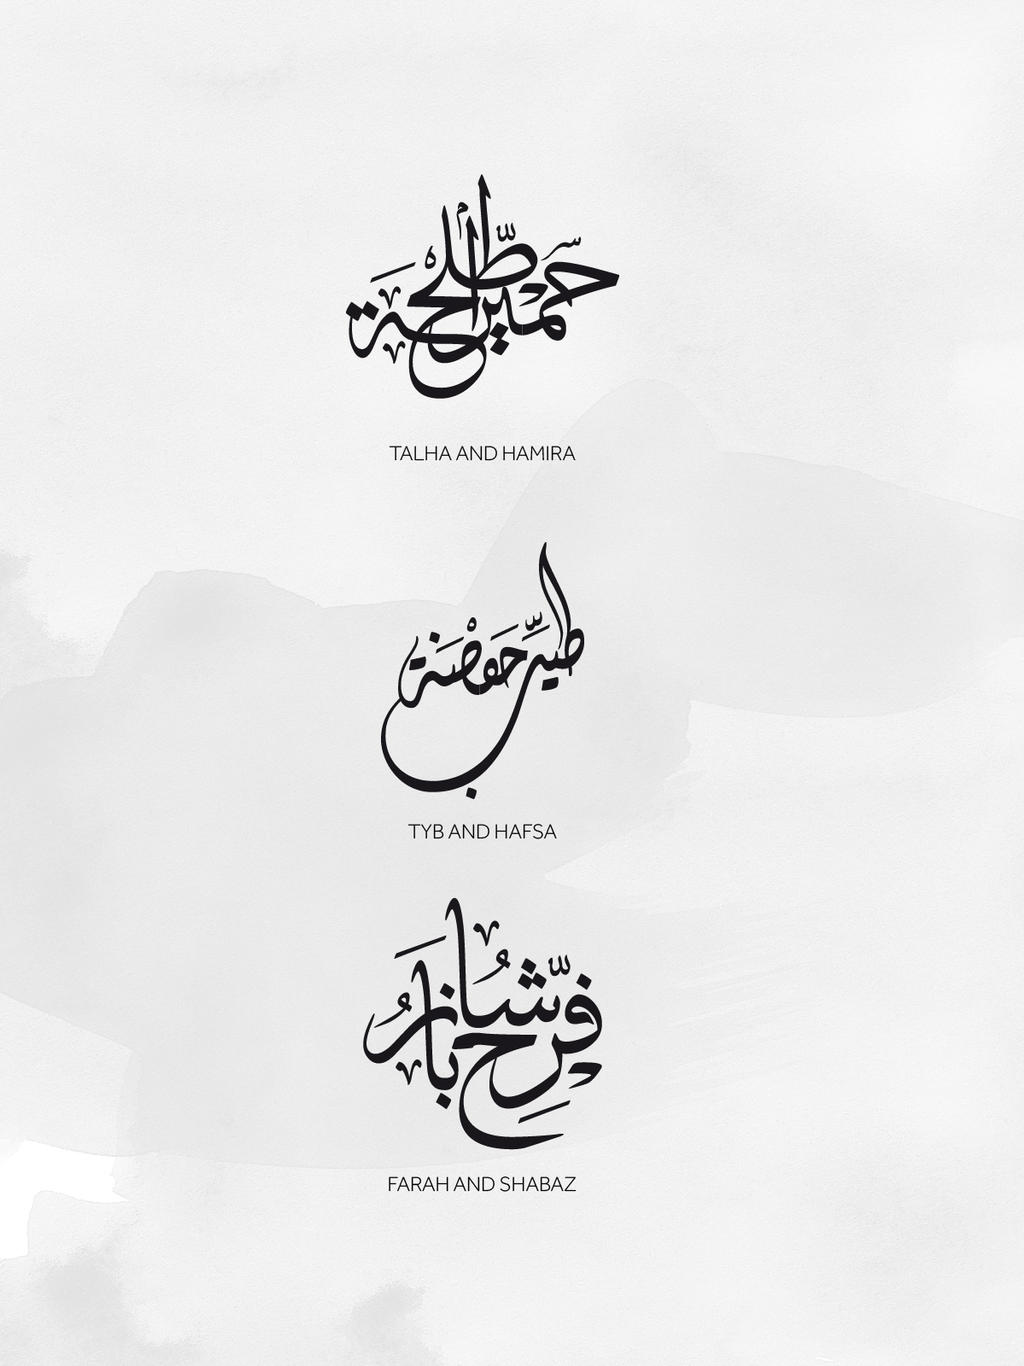 The online tool for arabic calligraphy   emashq.com